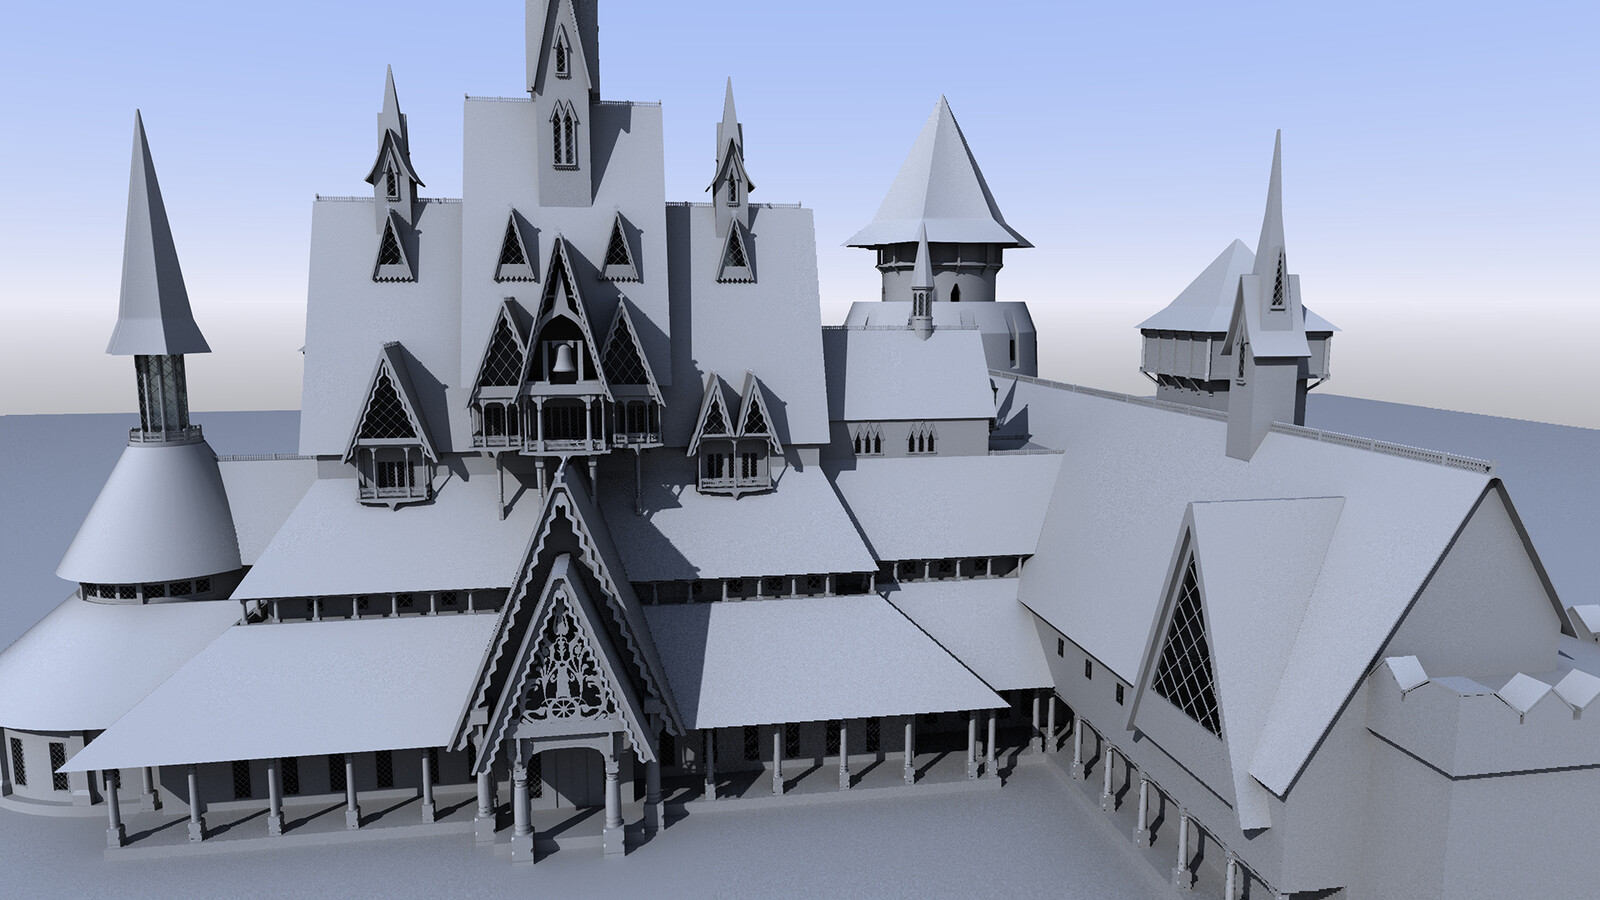 Arendelle - Side building and detail added